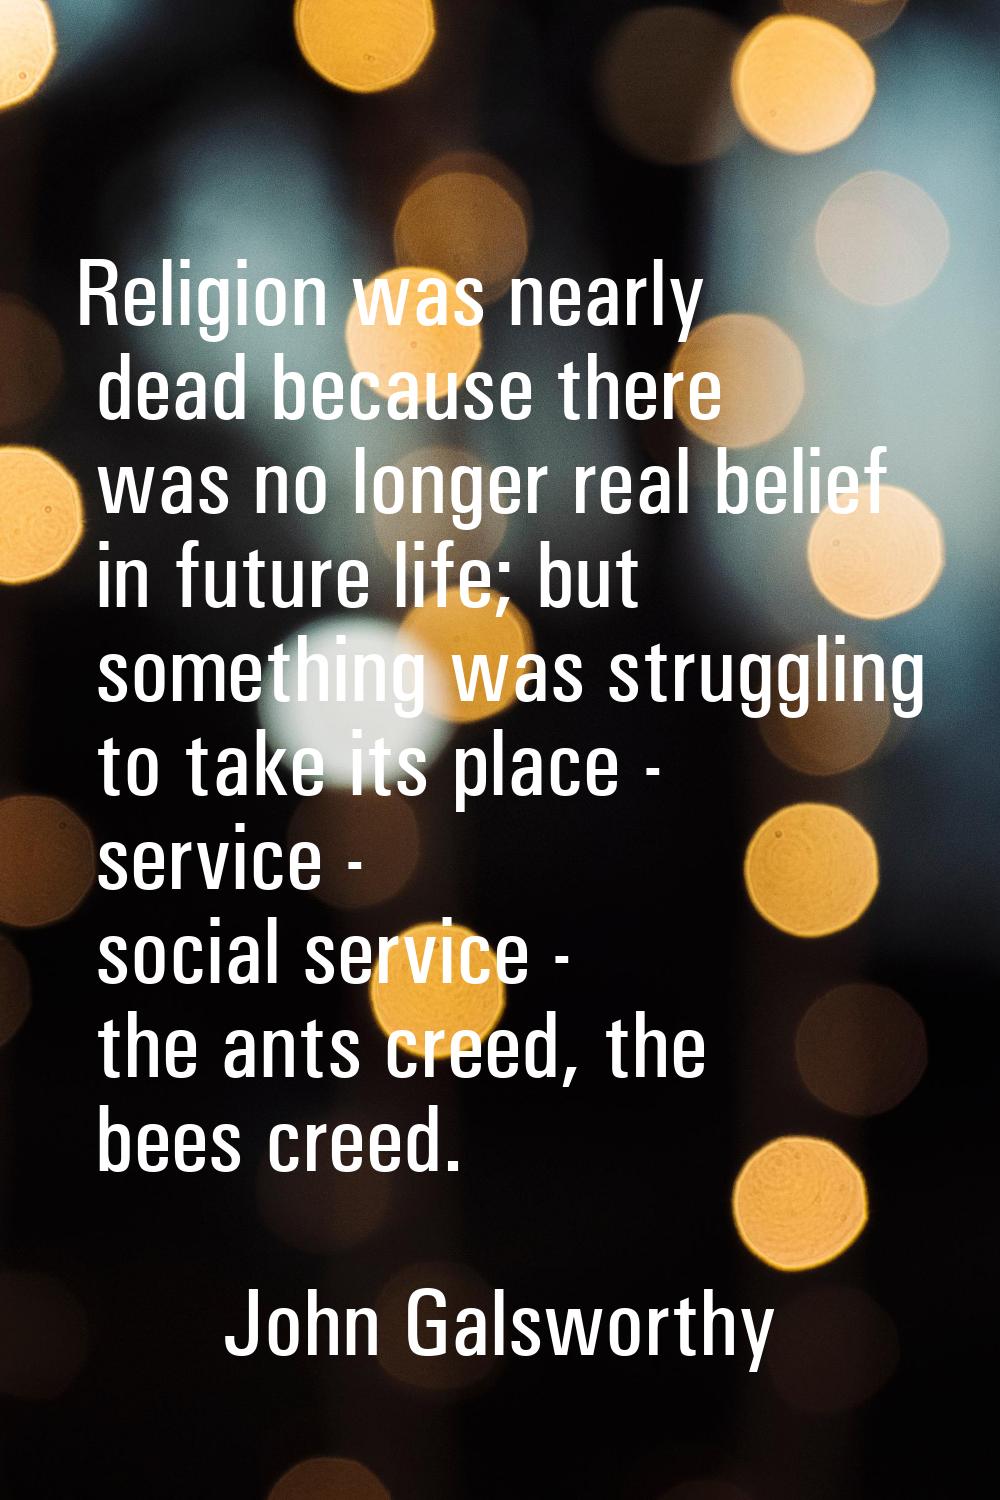 Religion was nearly dead because there was no longer real belief in future life; but something was 